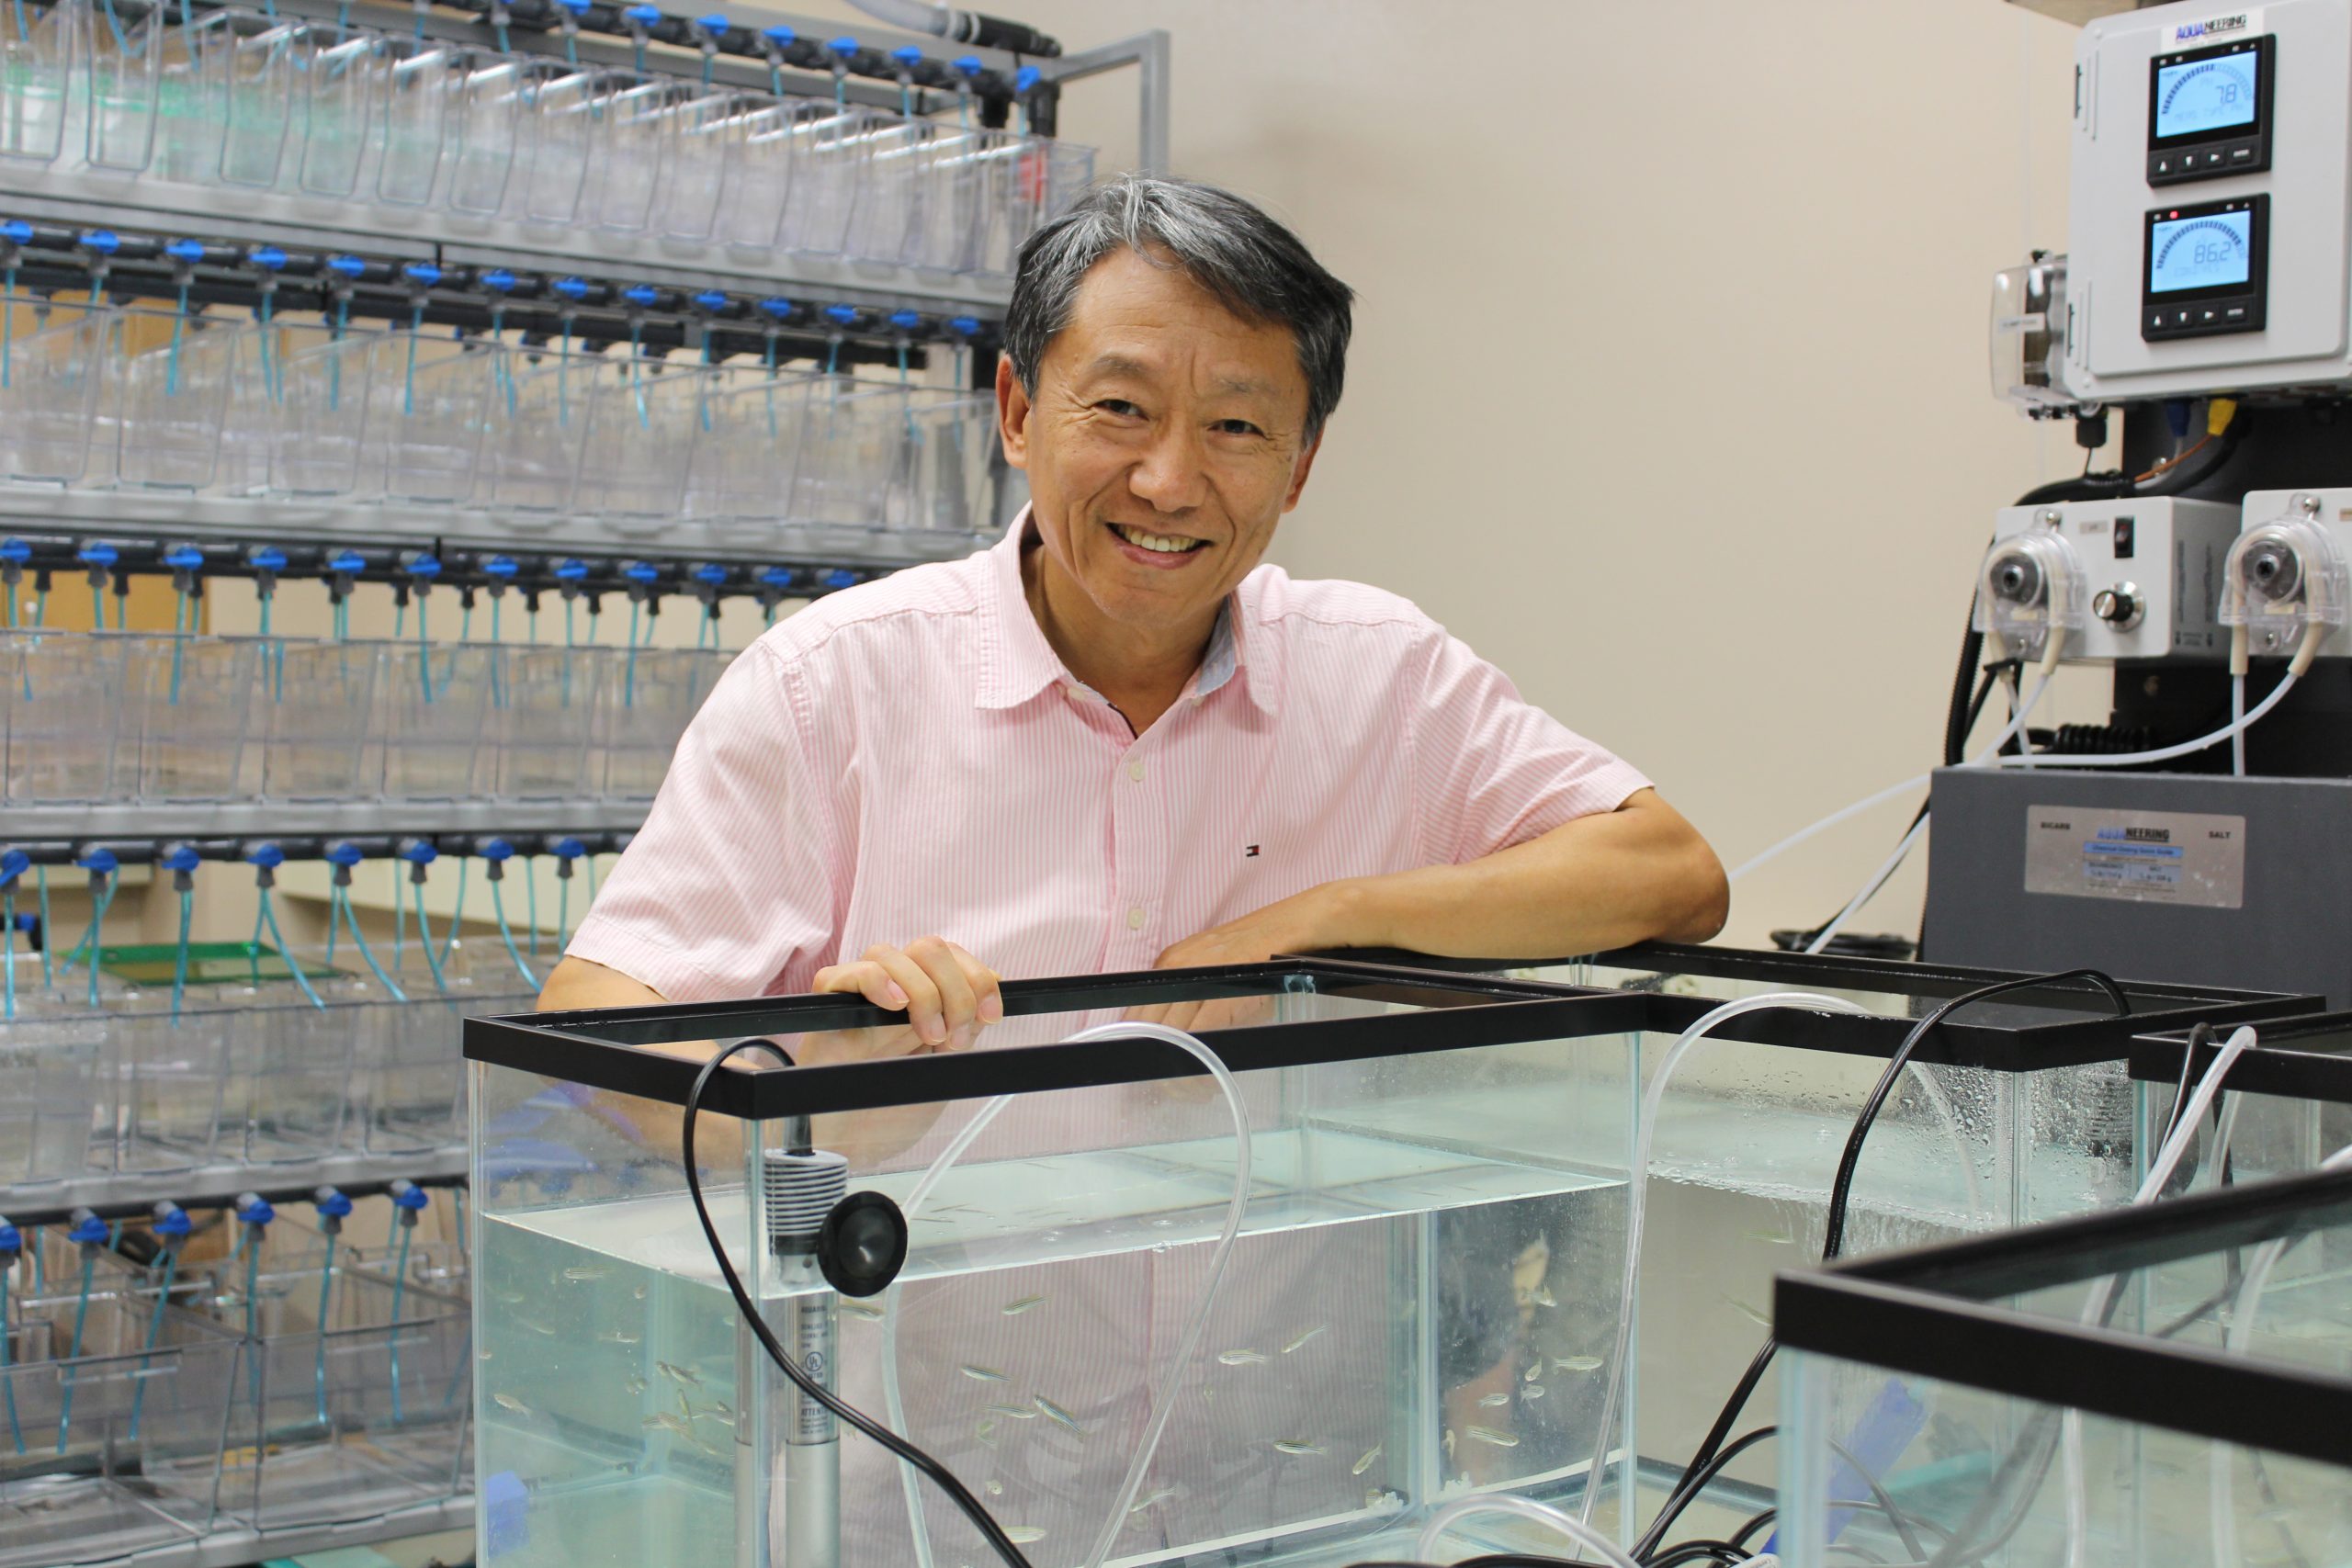 Dr. Lei Li serves as chair of the Department of Biology. Photo by Angie Faller.